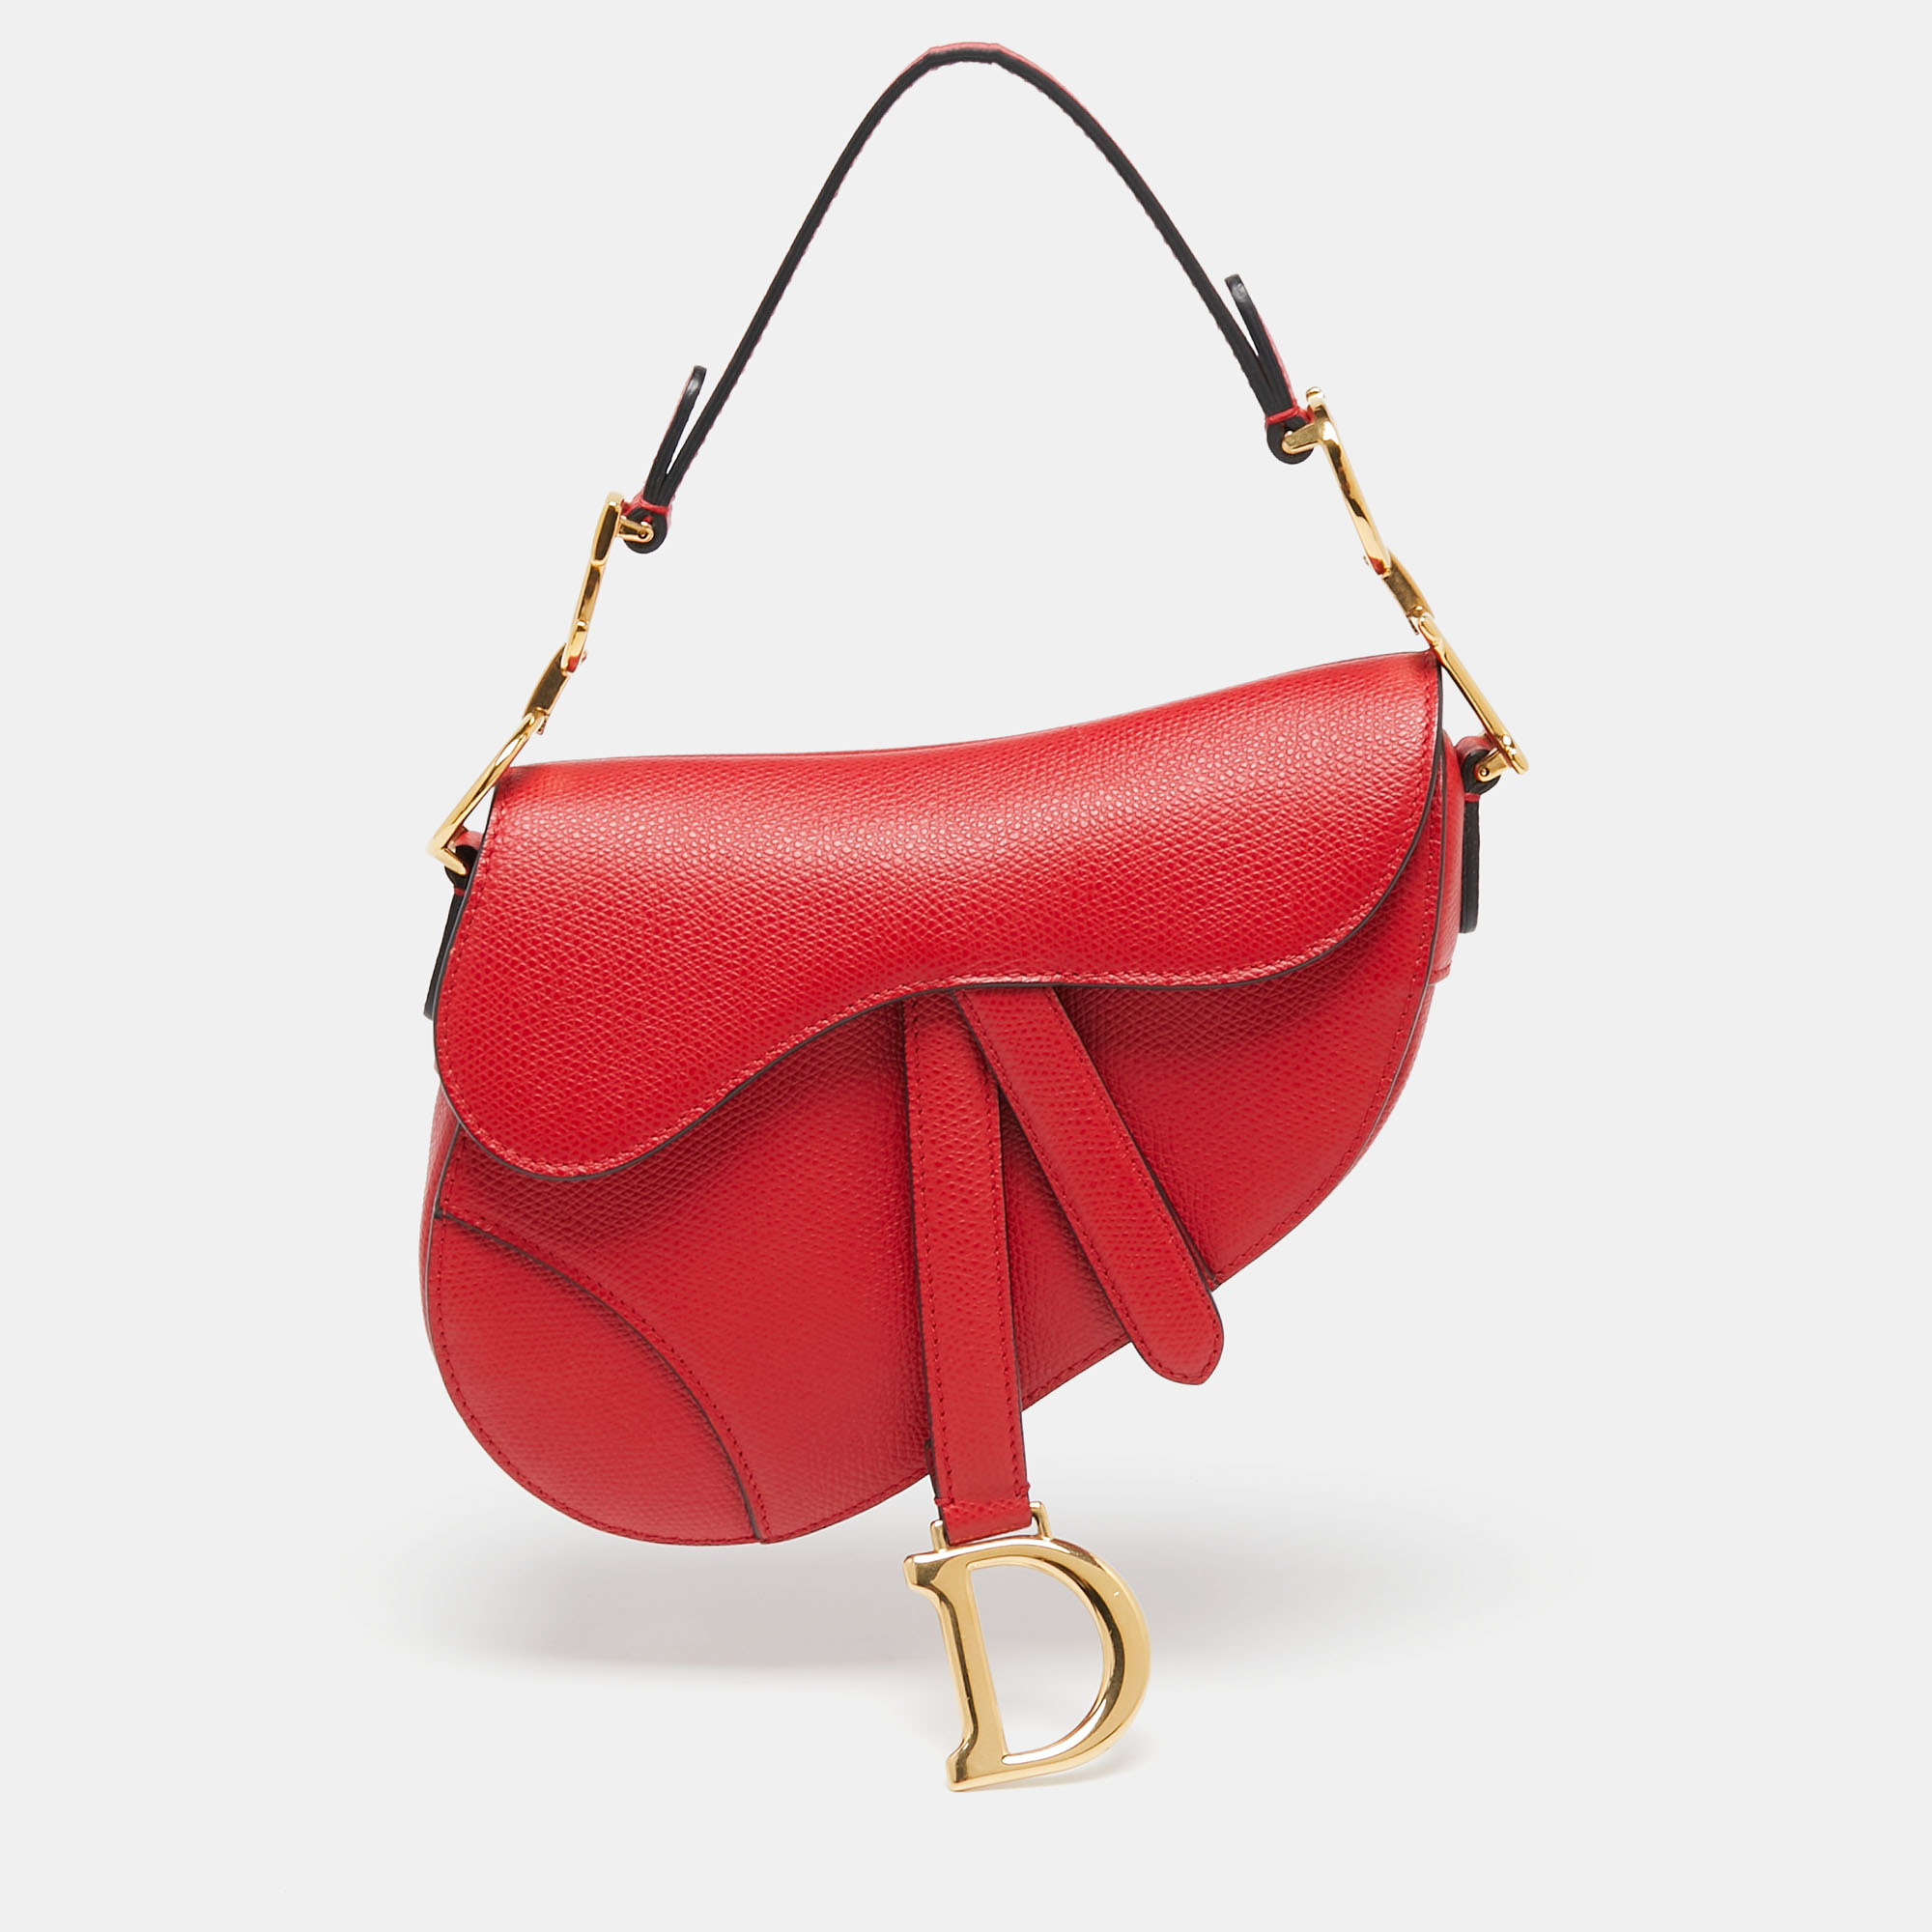 Sold Dior Saddle bag red grain leather mini size with strap – Luxbags